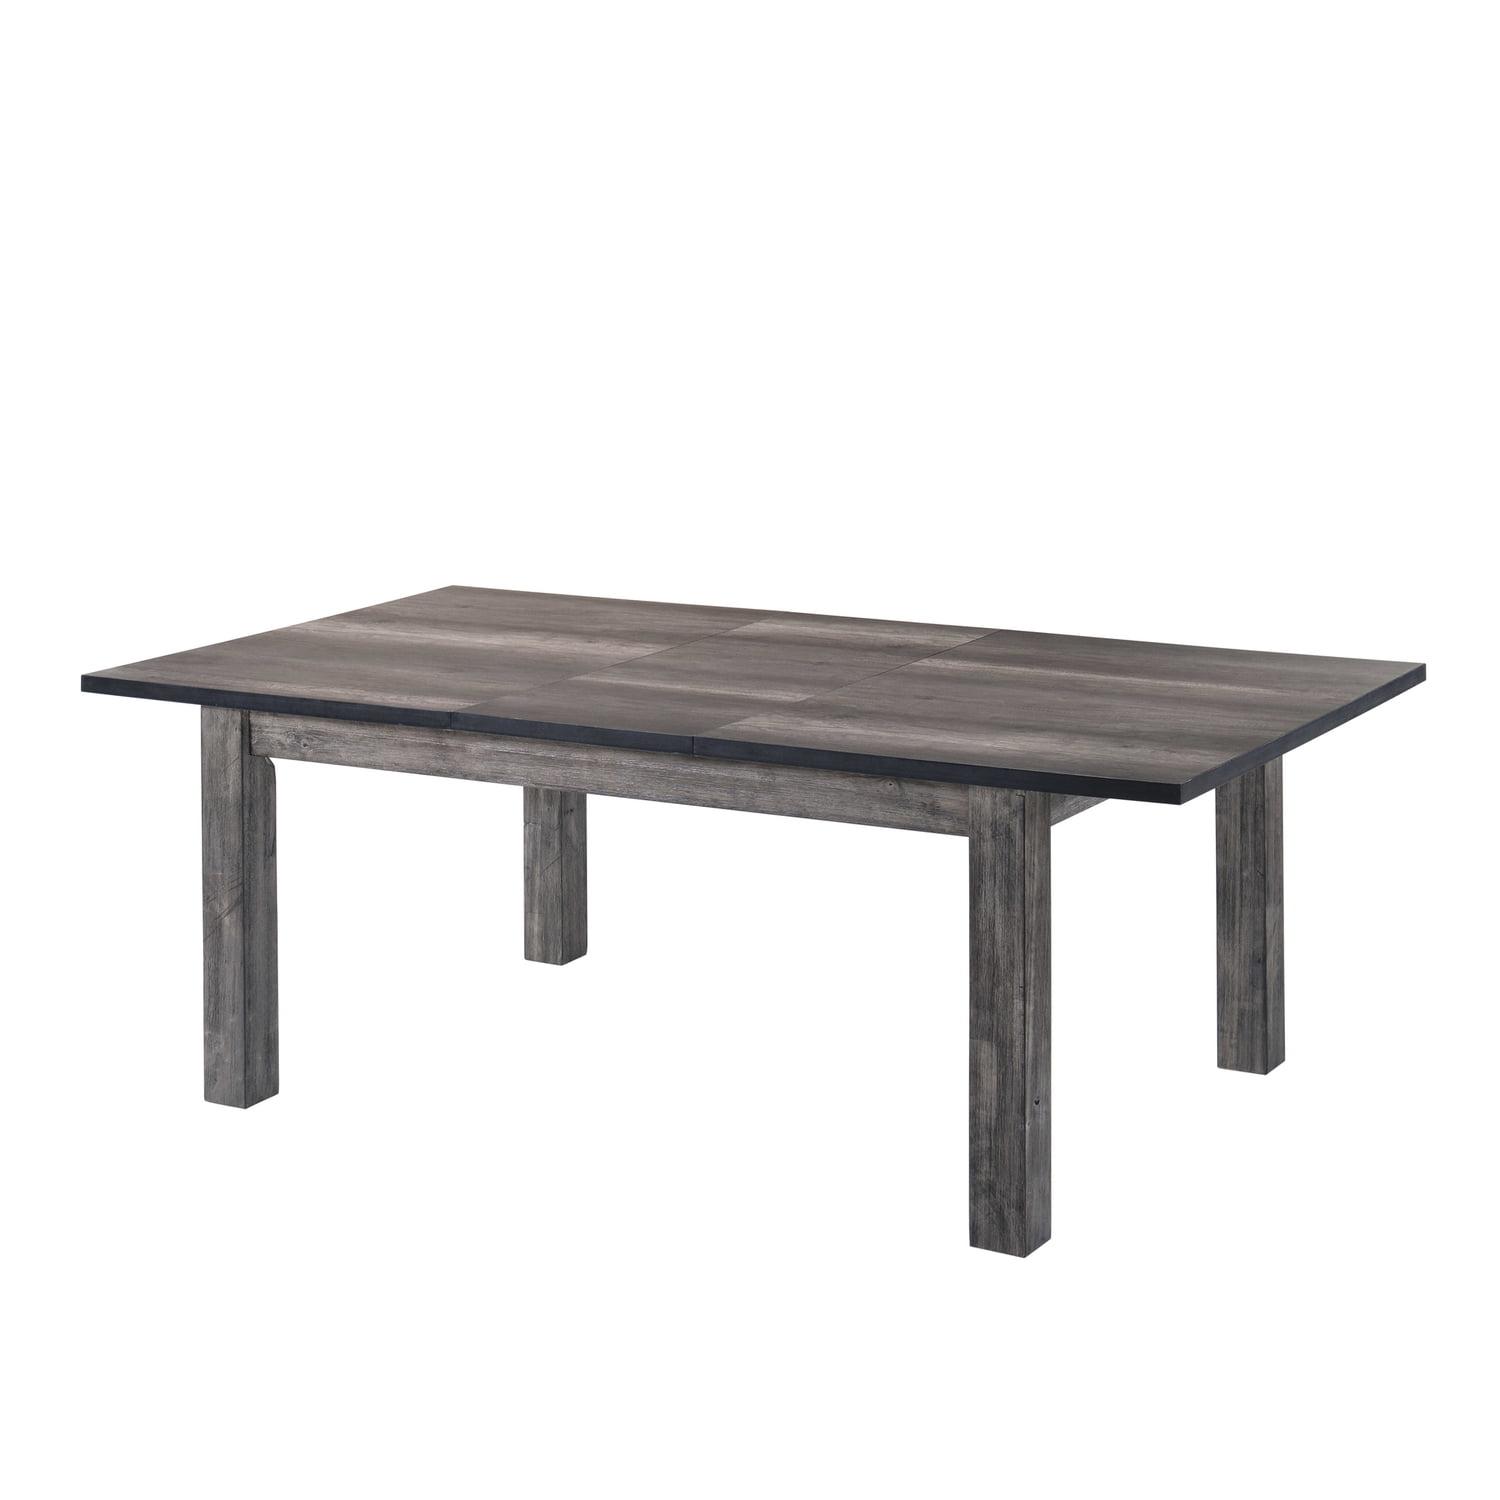 Grayson Rustic Extendable Dining Table in Gray Oak